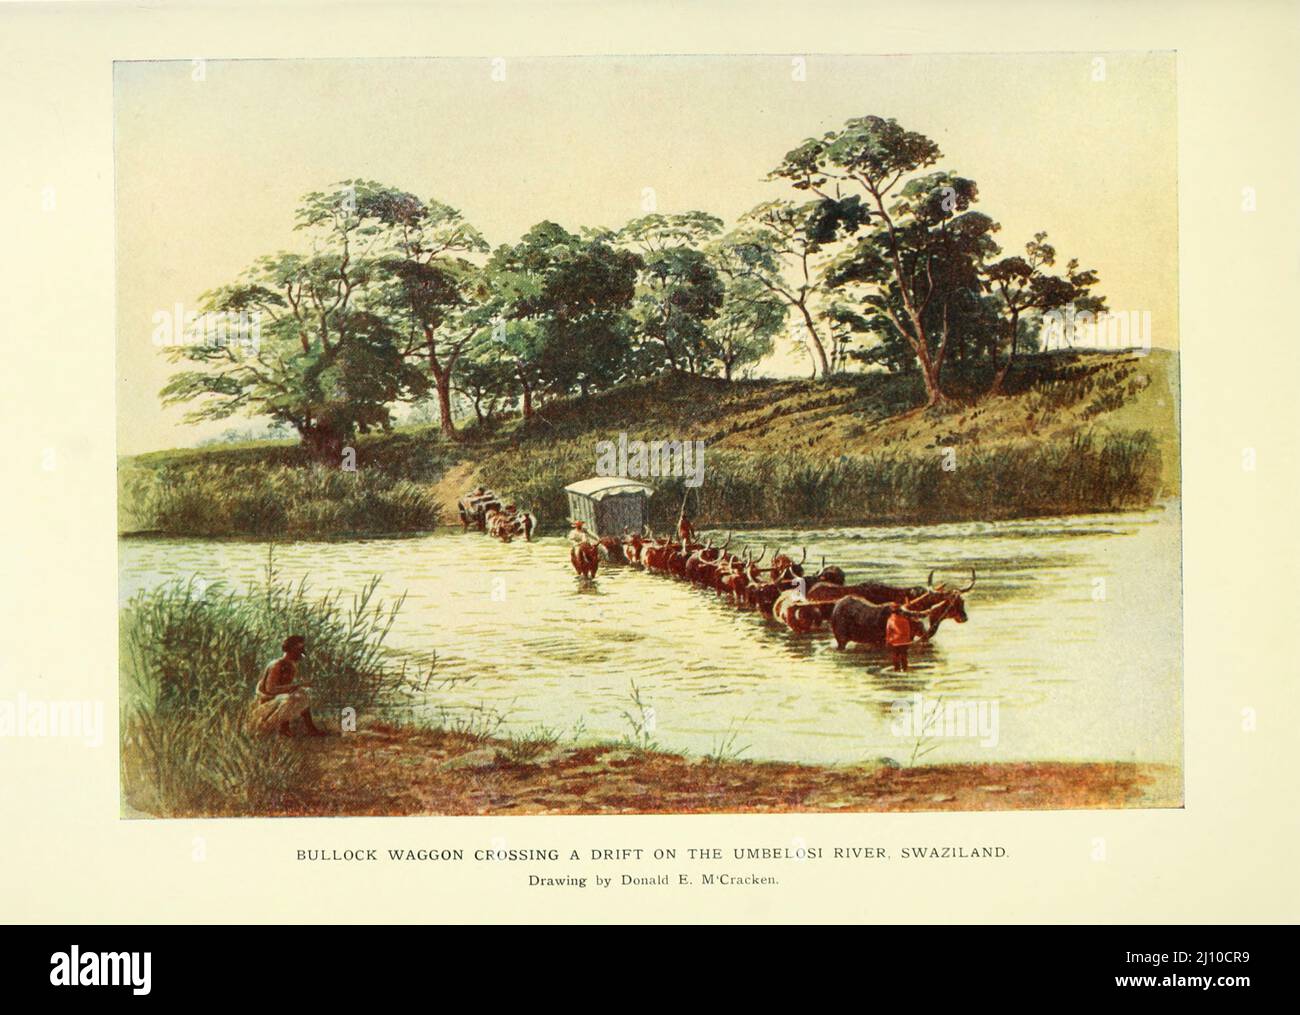 Bullock Waggon crossing a Drift on the Umbelosi River, Swaziland by Donald E. M'Cracken from the book  ' South Africa and the Transvaal war ' by Louis Creswicke, Publisher; Edinburgh : T. C. & E. C. Jack 1900 Stock Photo